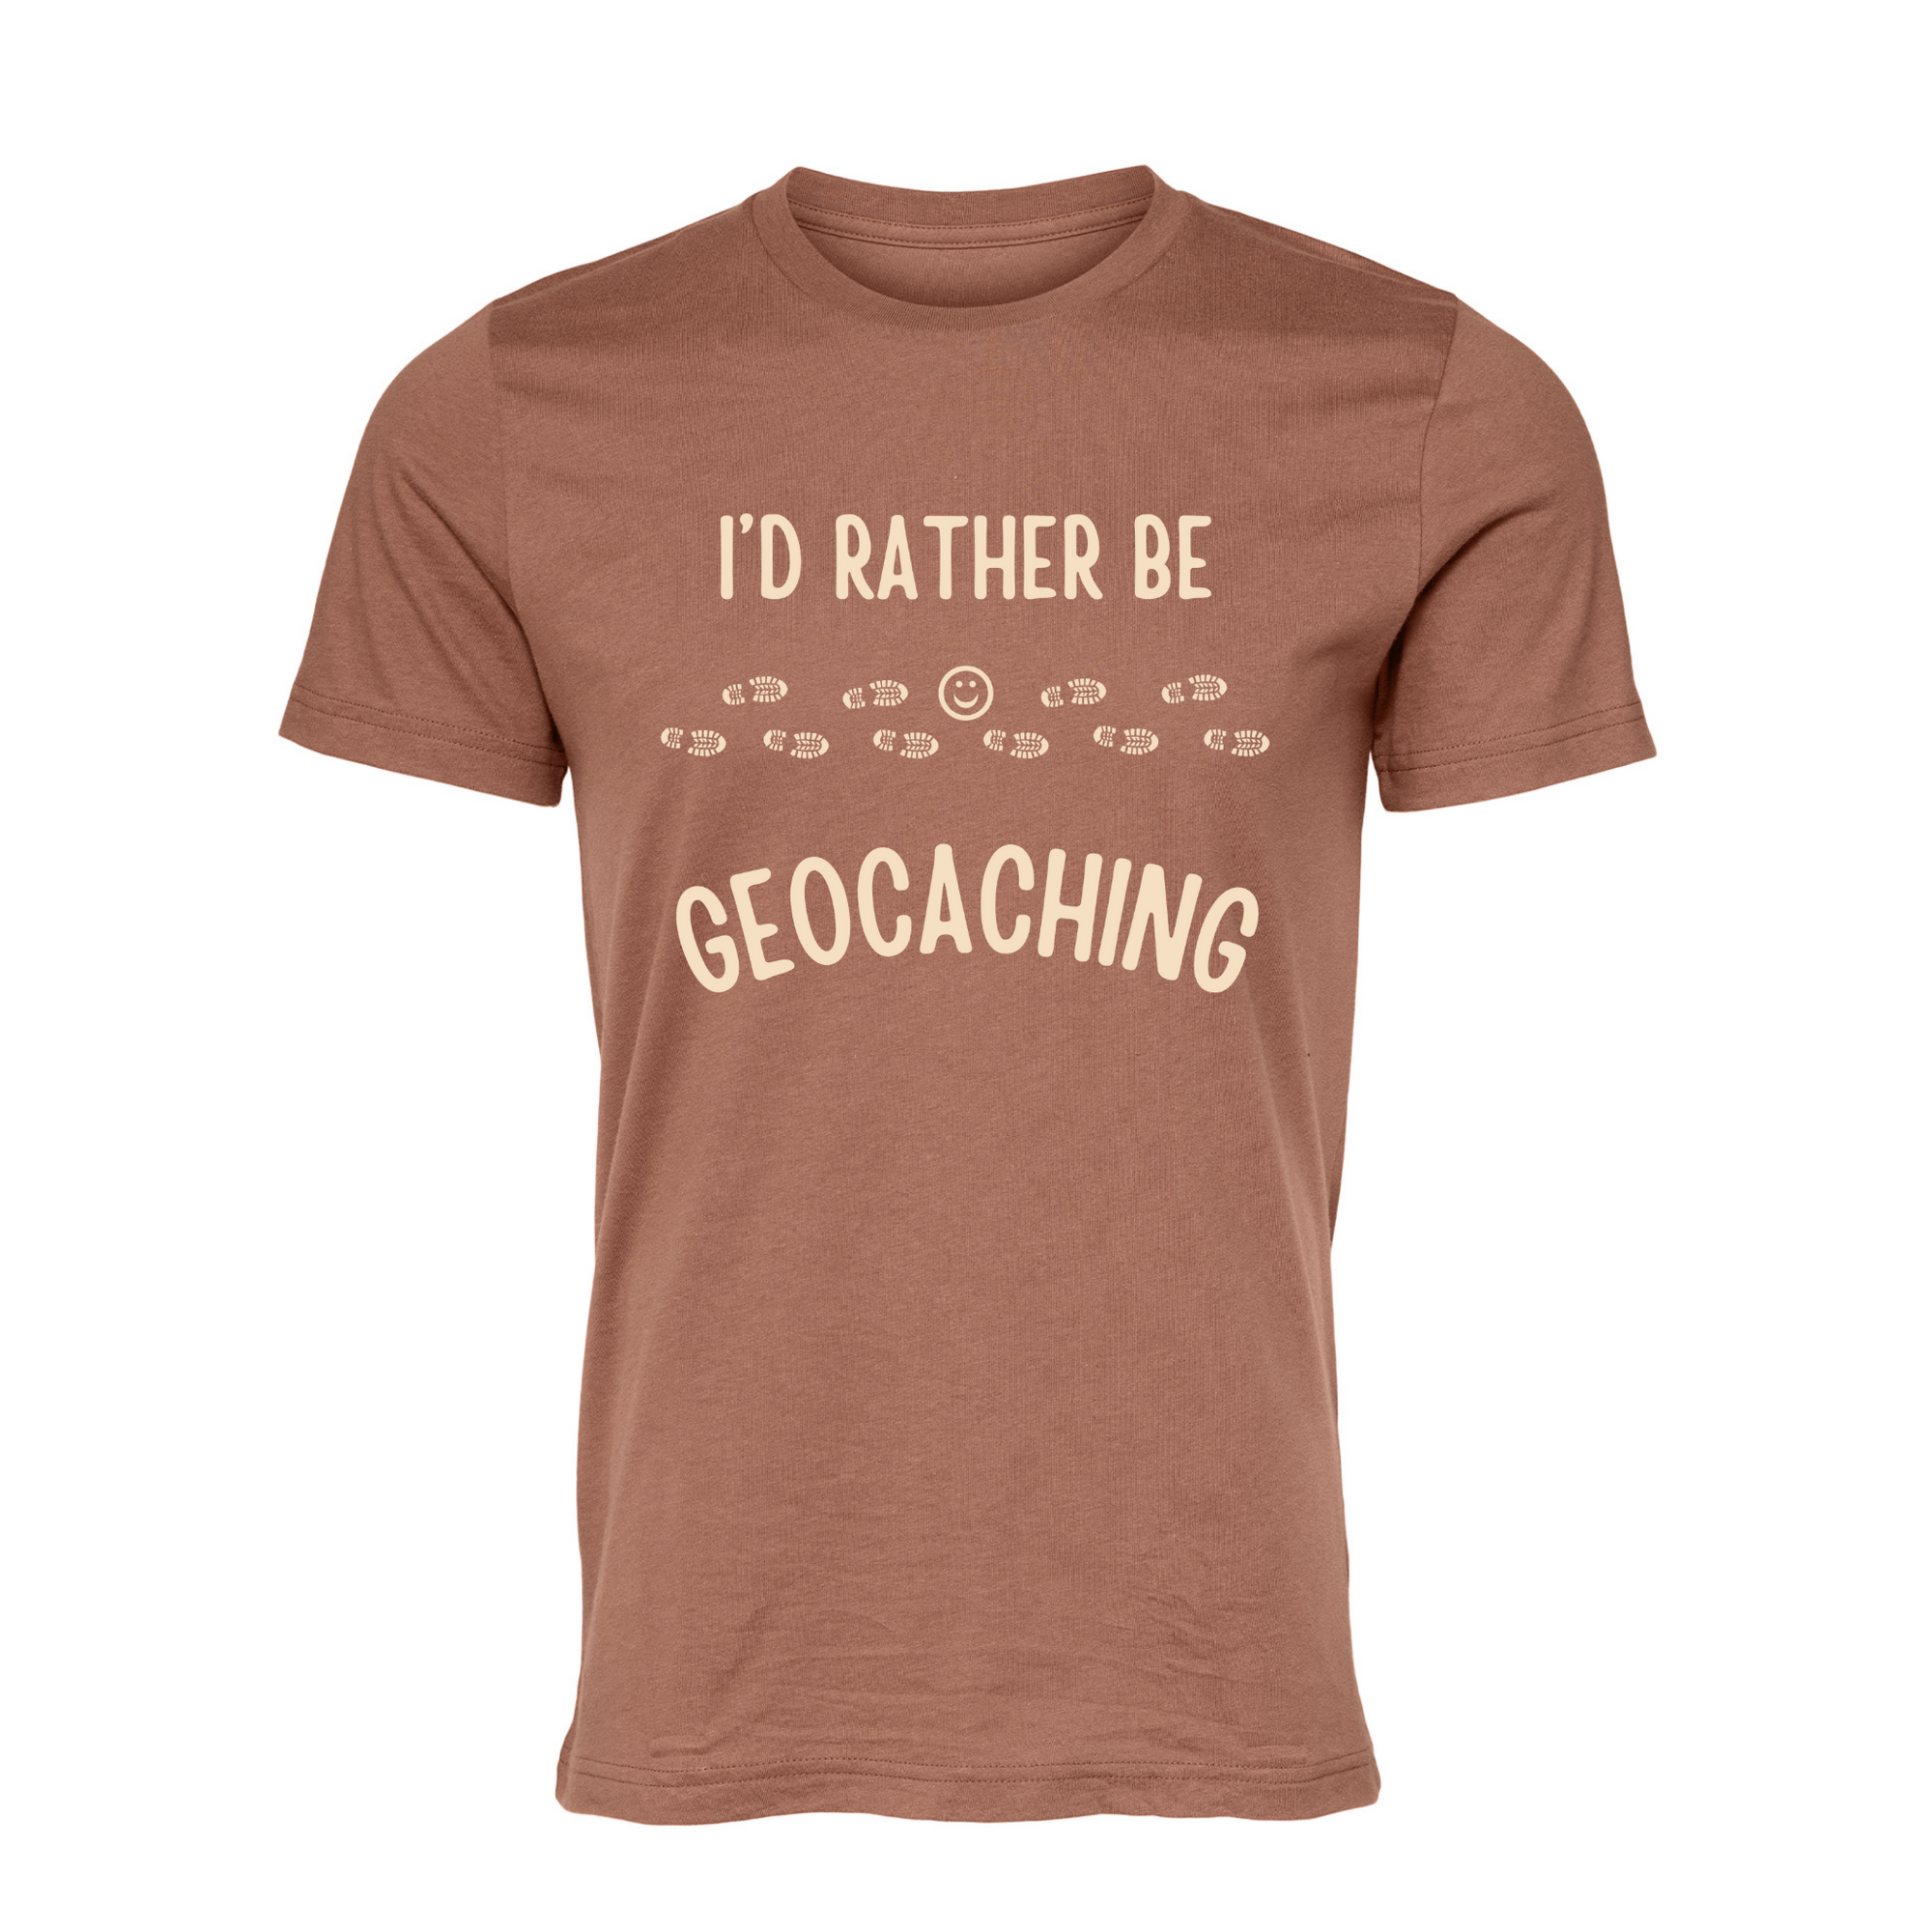 I'd Rather Be Geocaching Chestnut T-Shirt